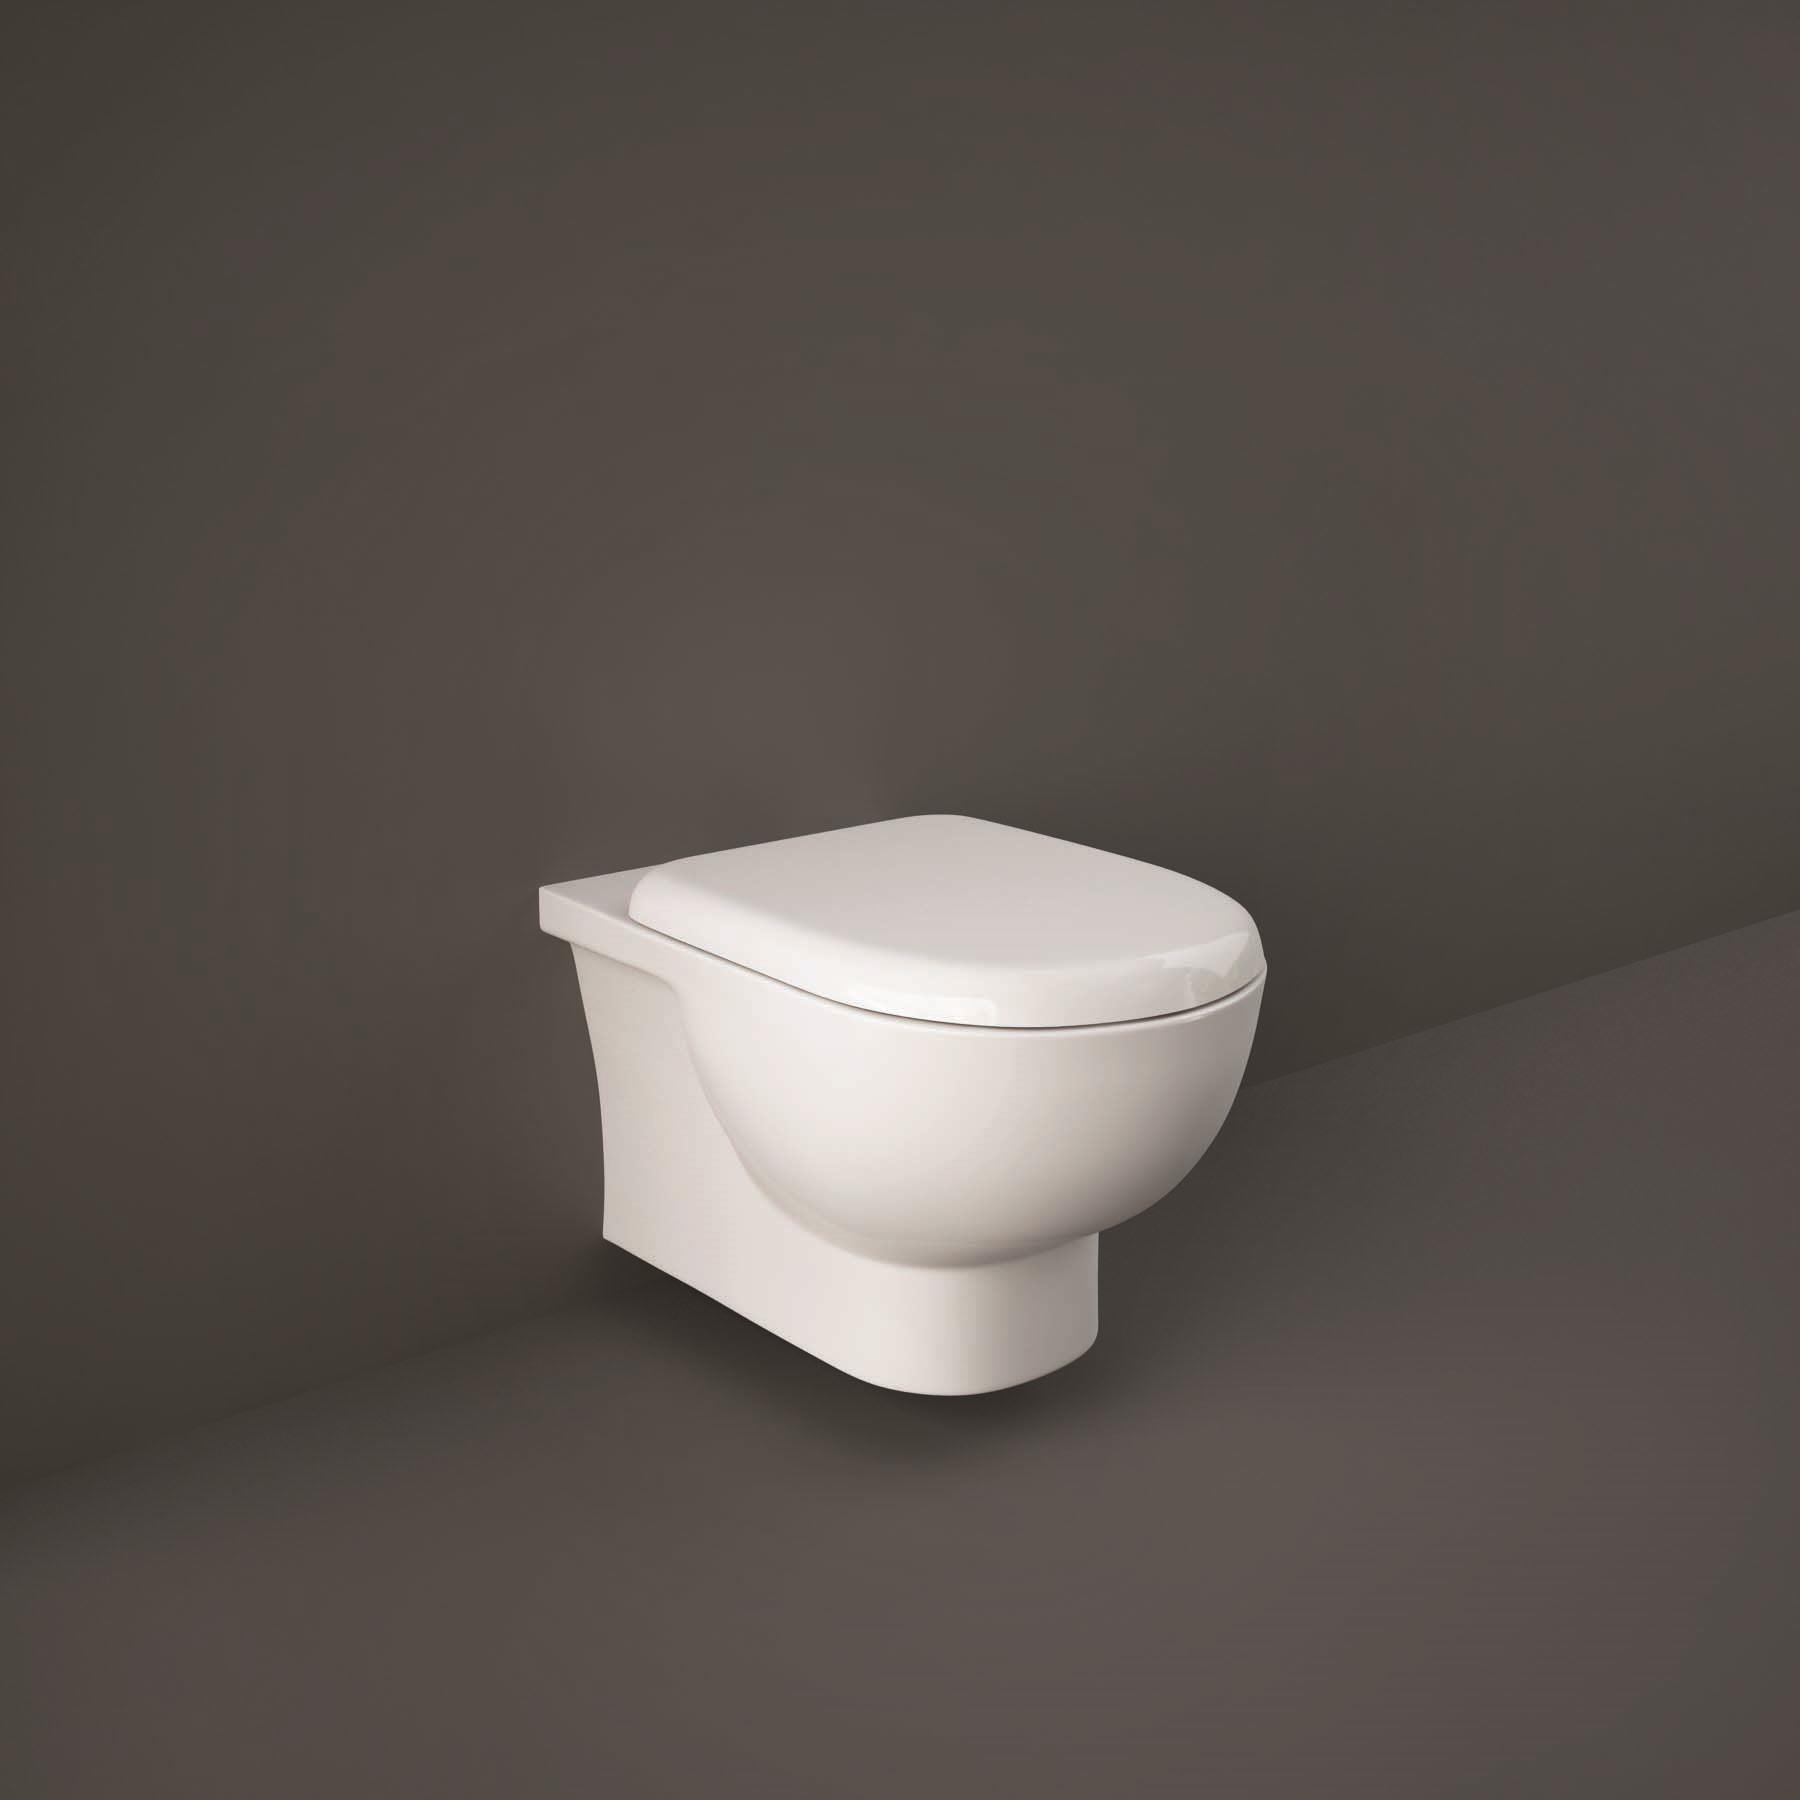 Wall Hung Toilet With Soft Close Seat On Brown Background